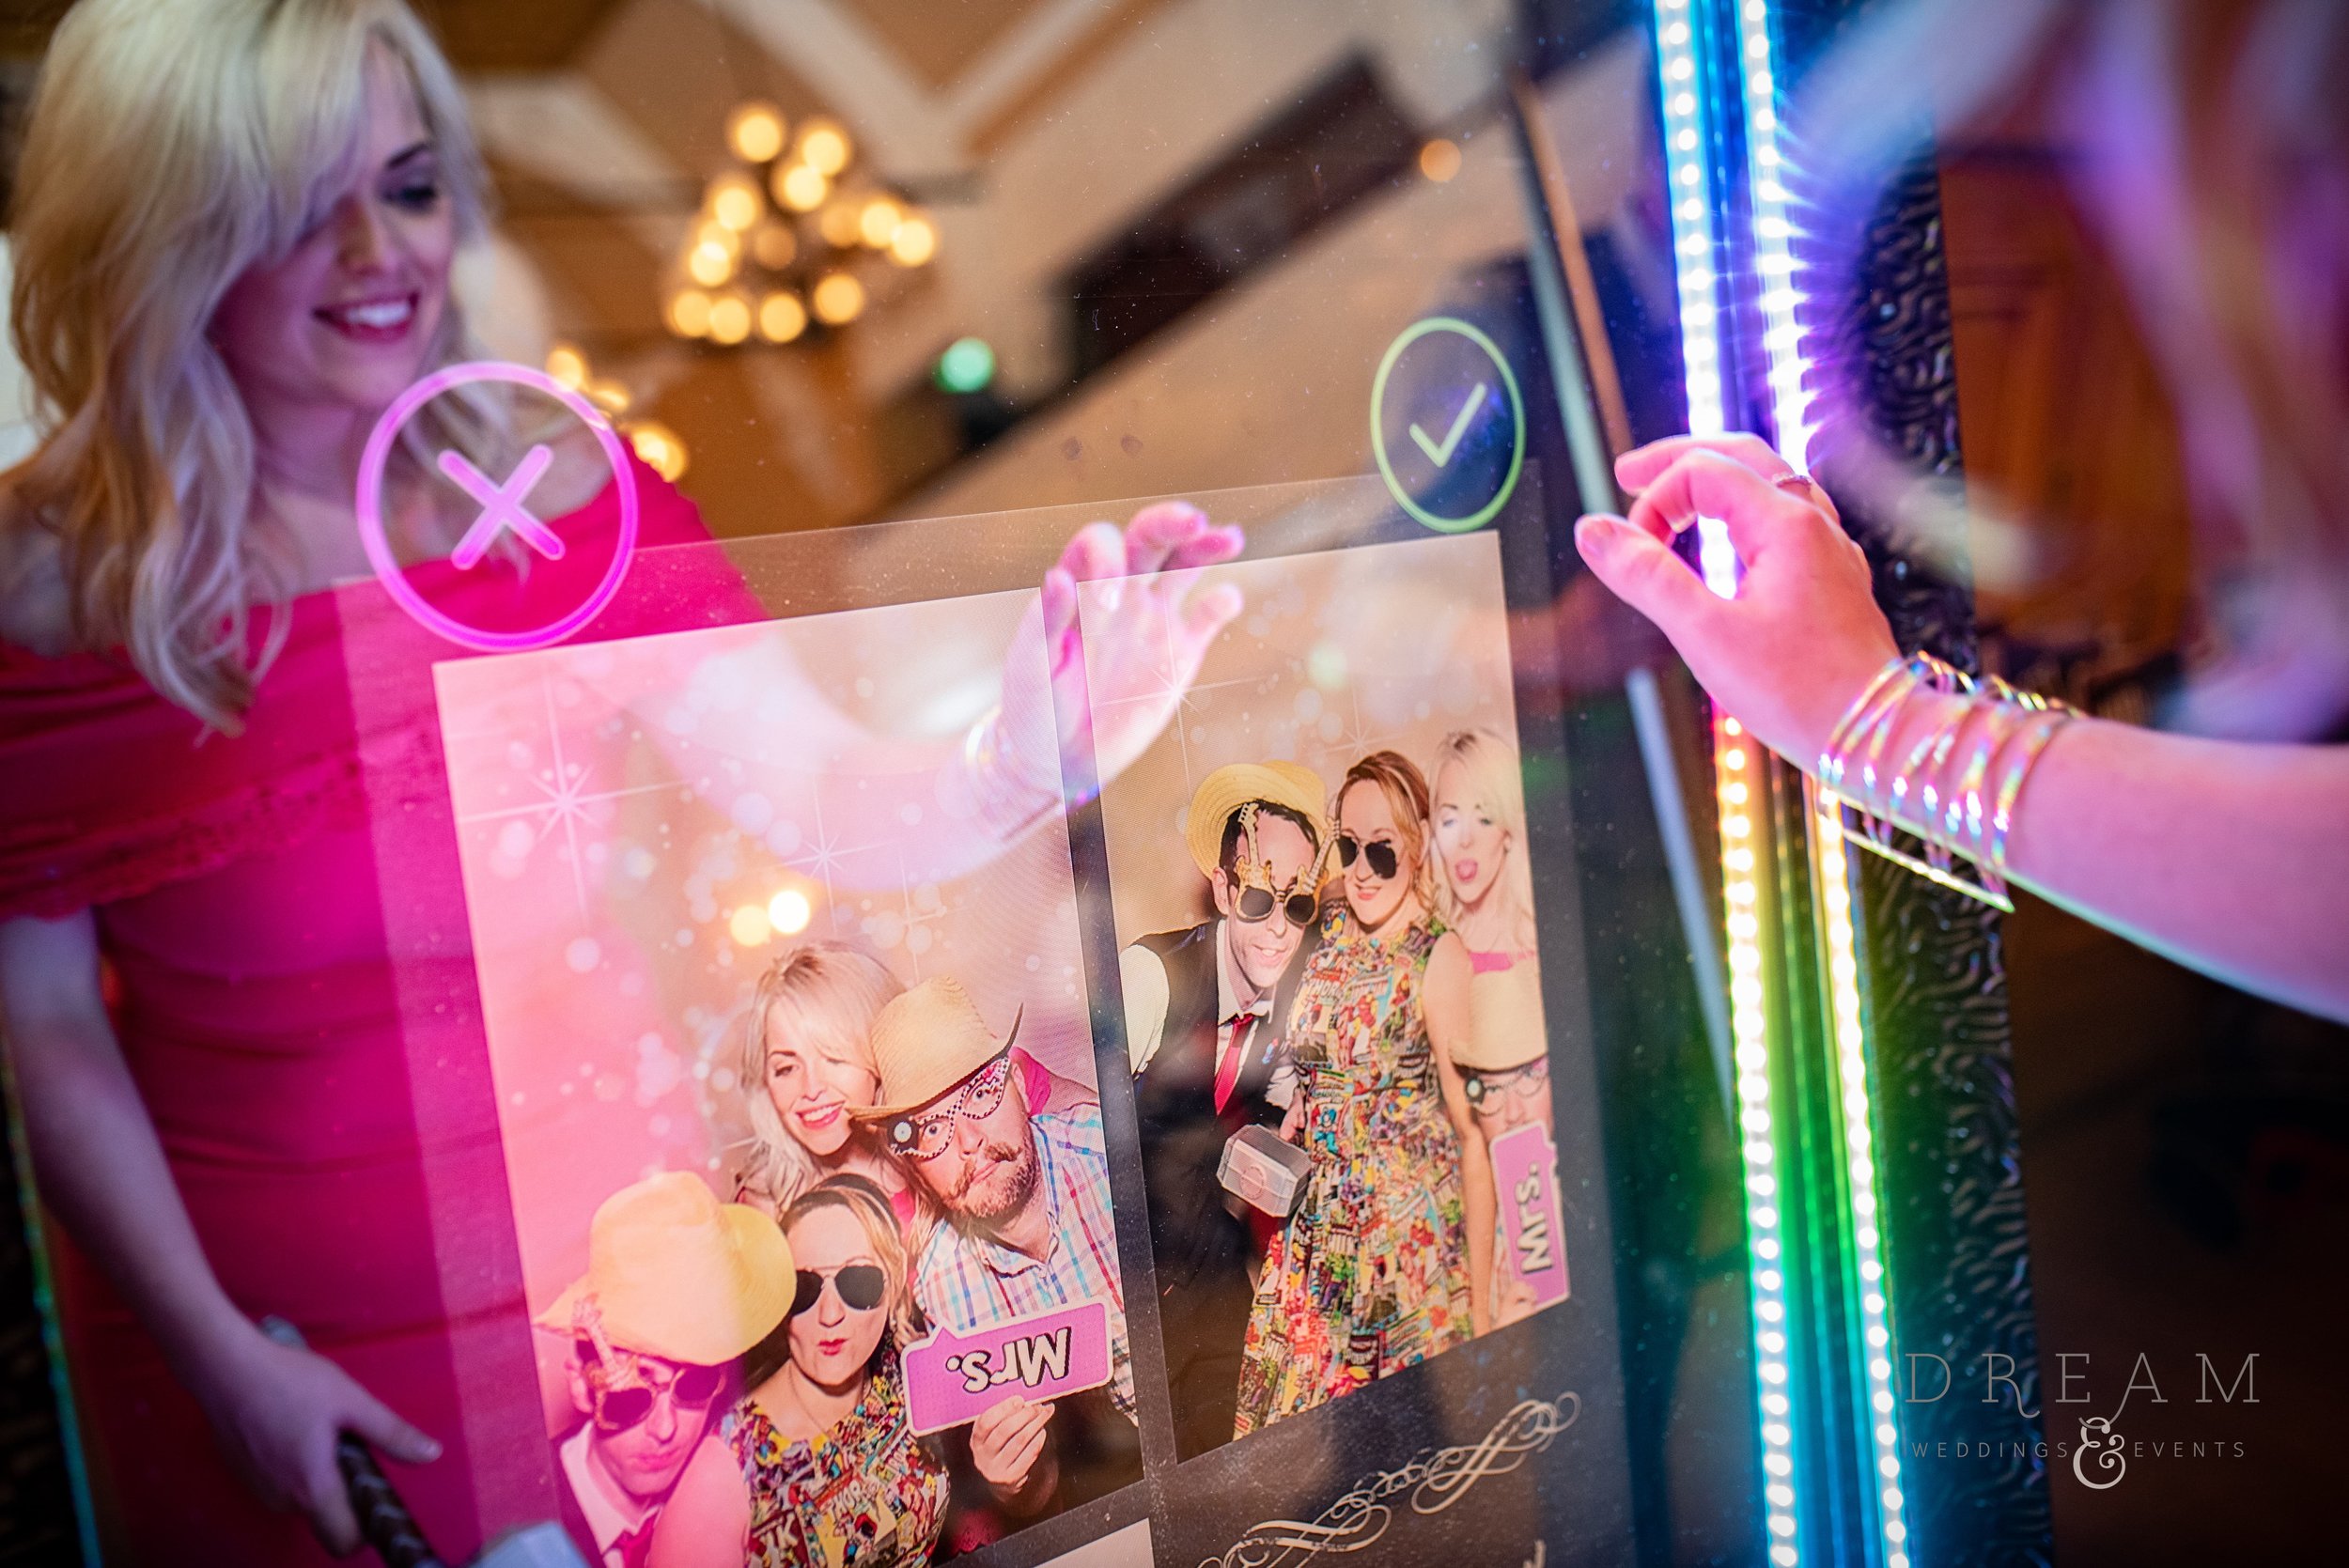 Magic Selfie Mirror Photo Booth Hire Nottingham, Derby, Leicester, East Midlands